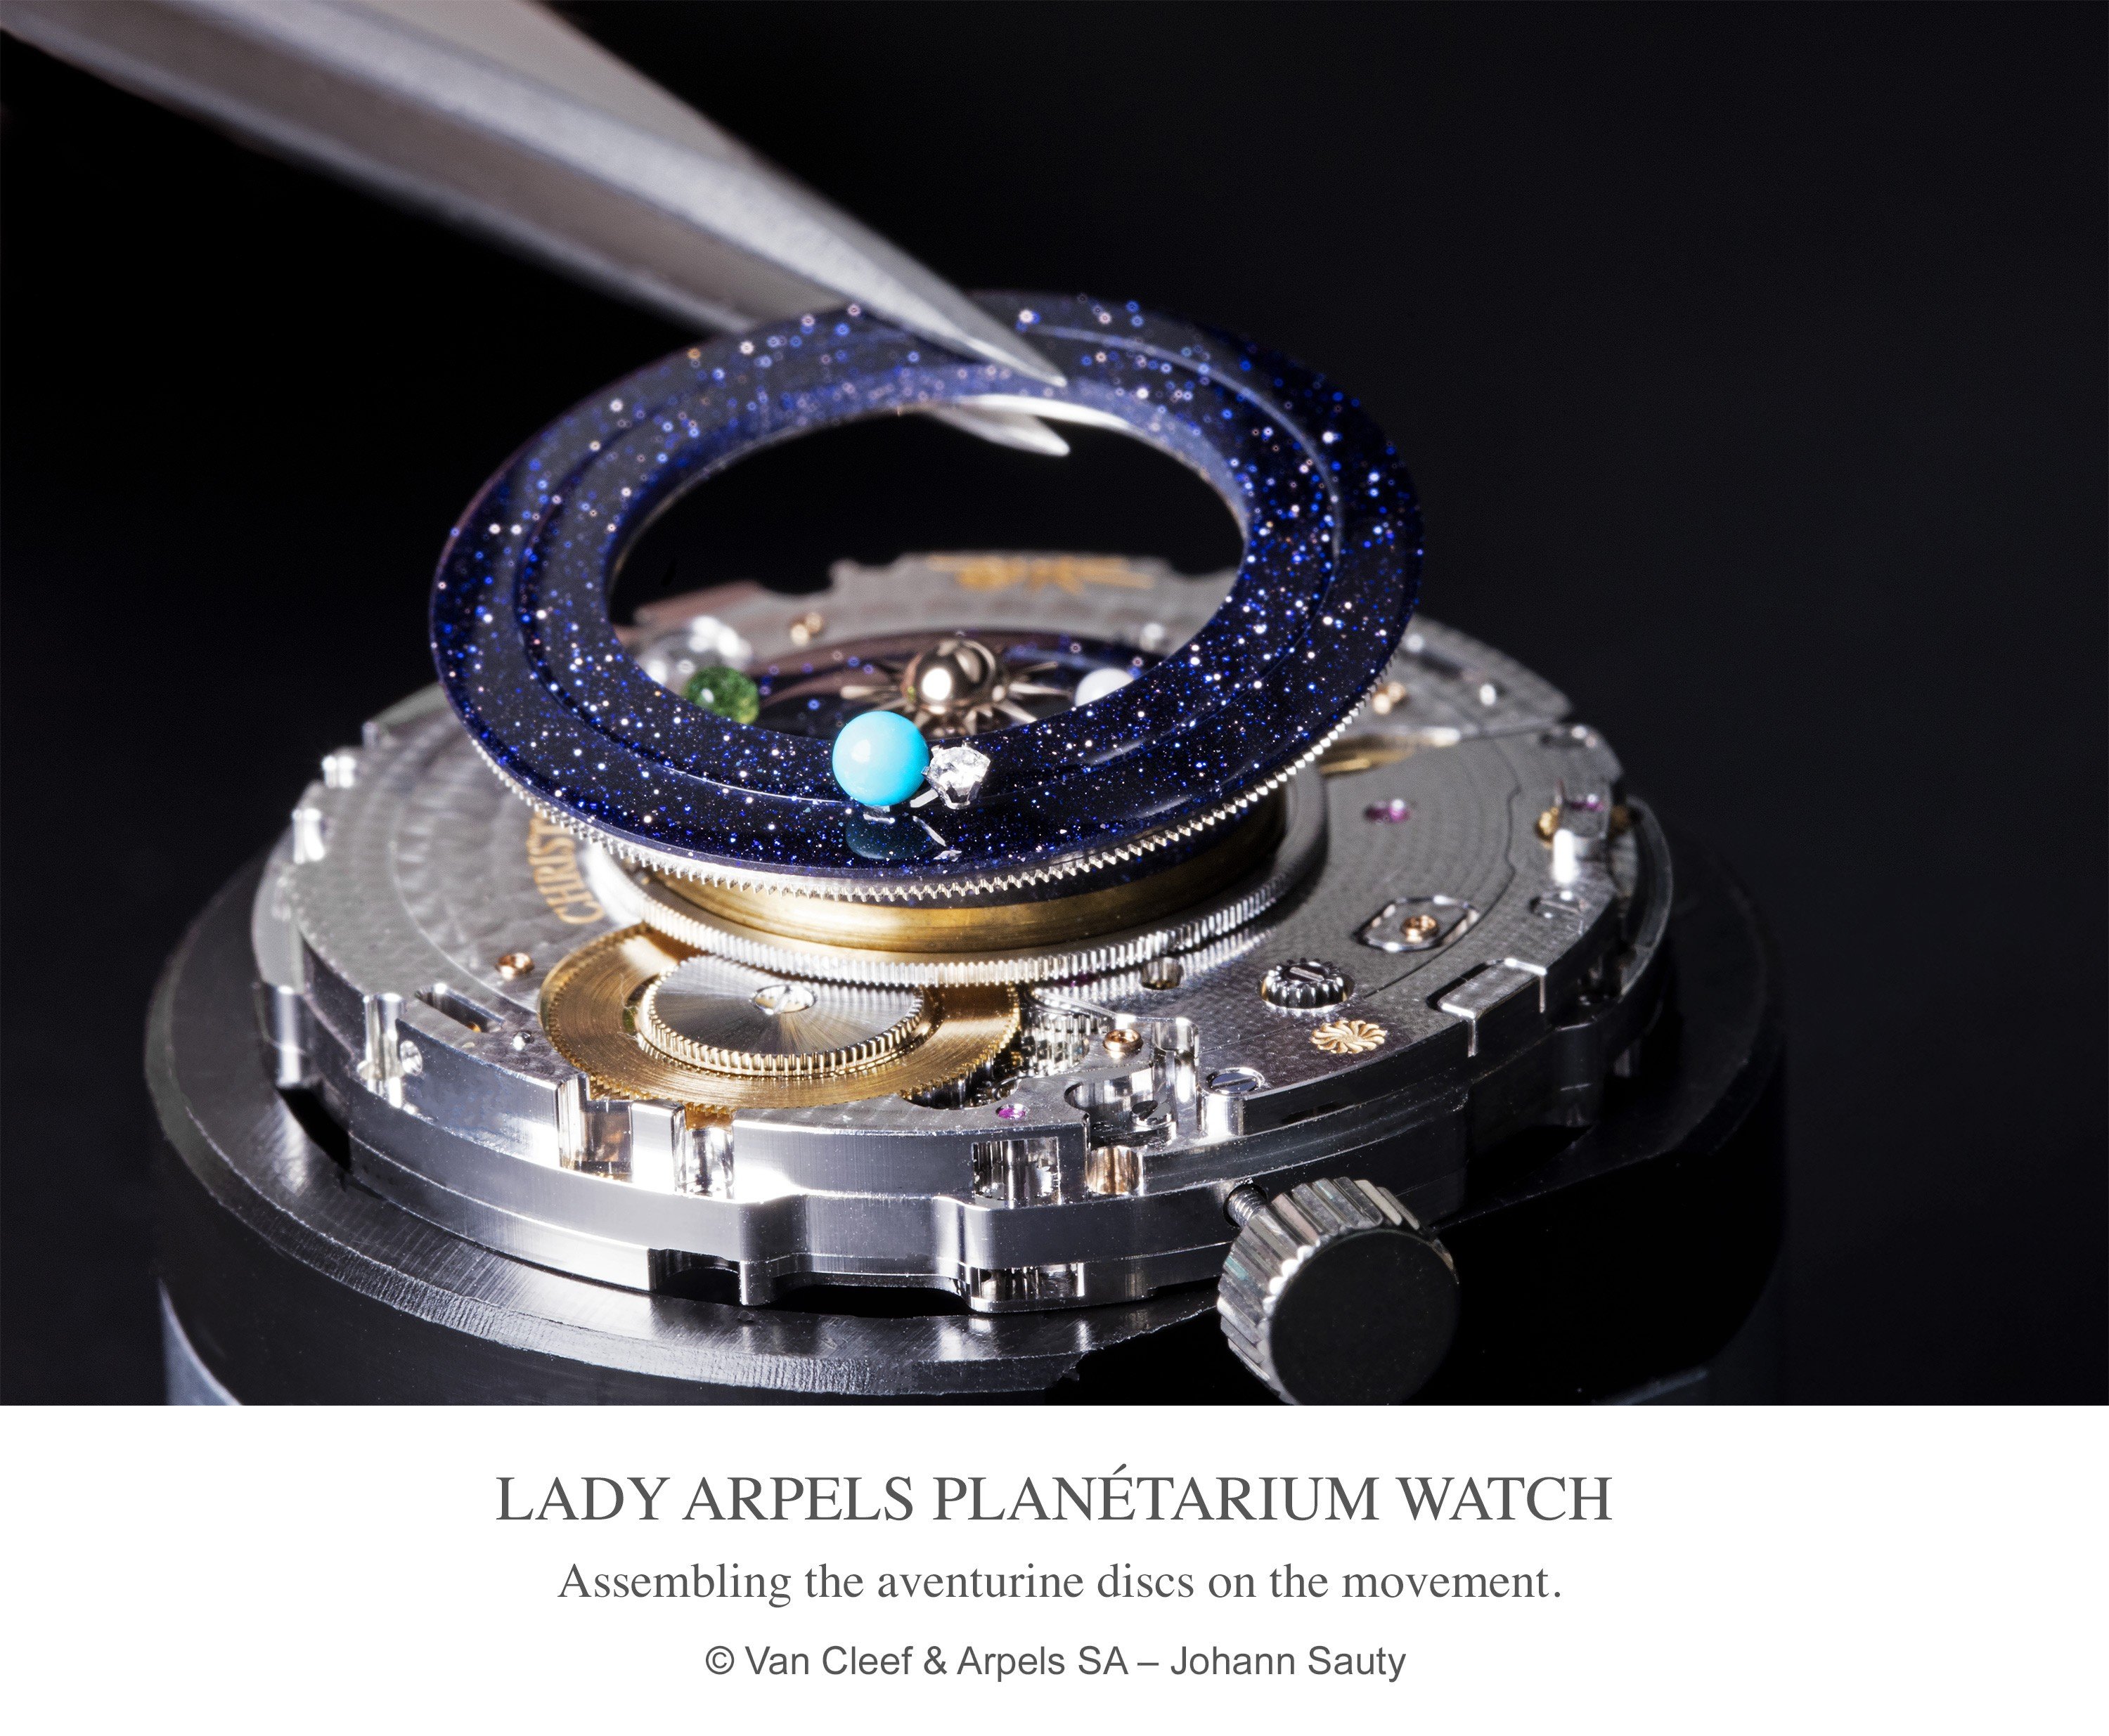 The Lady Arpels Planétarium Poetic Complications watch reflects the motions of the planets as they revolve around the sun.